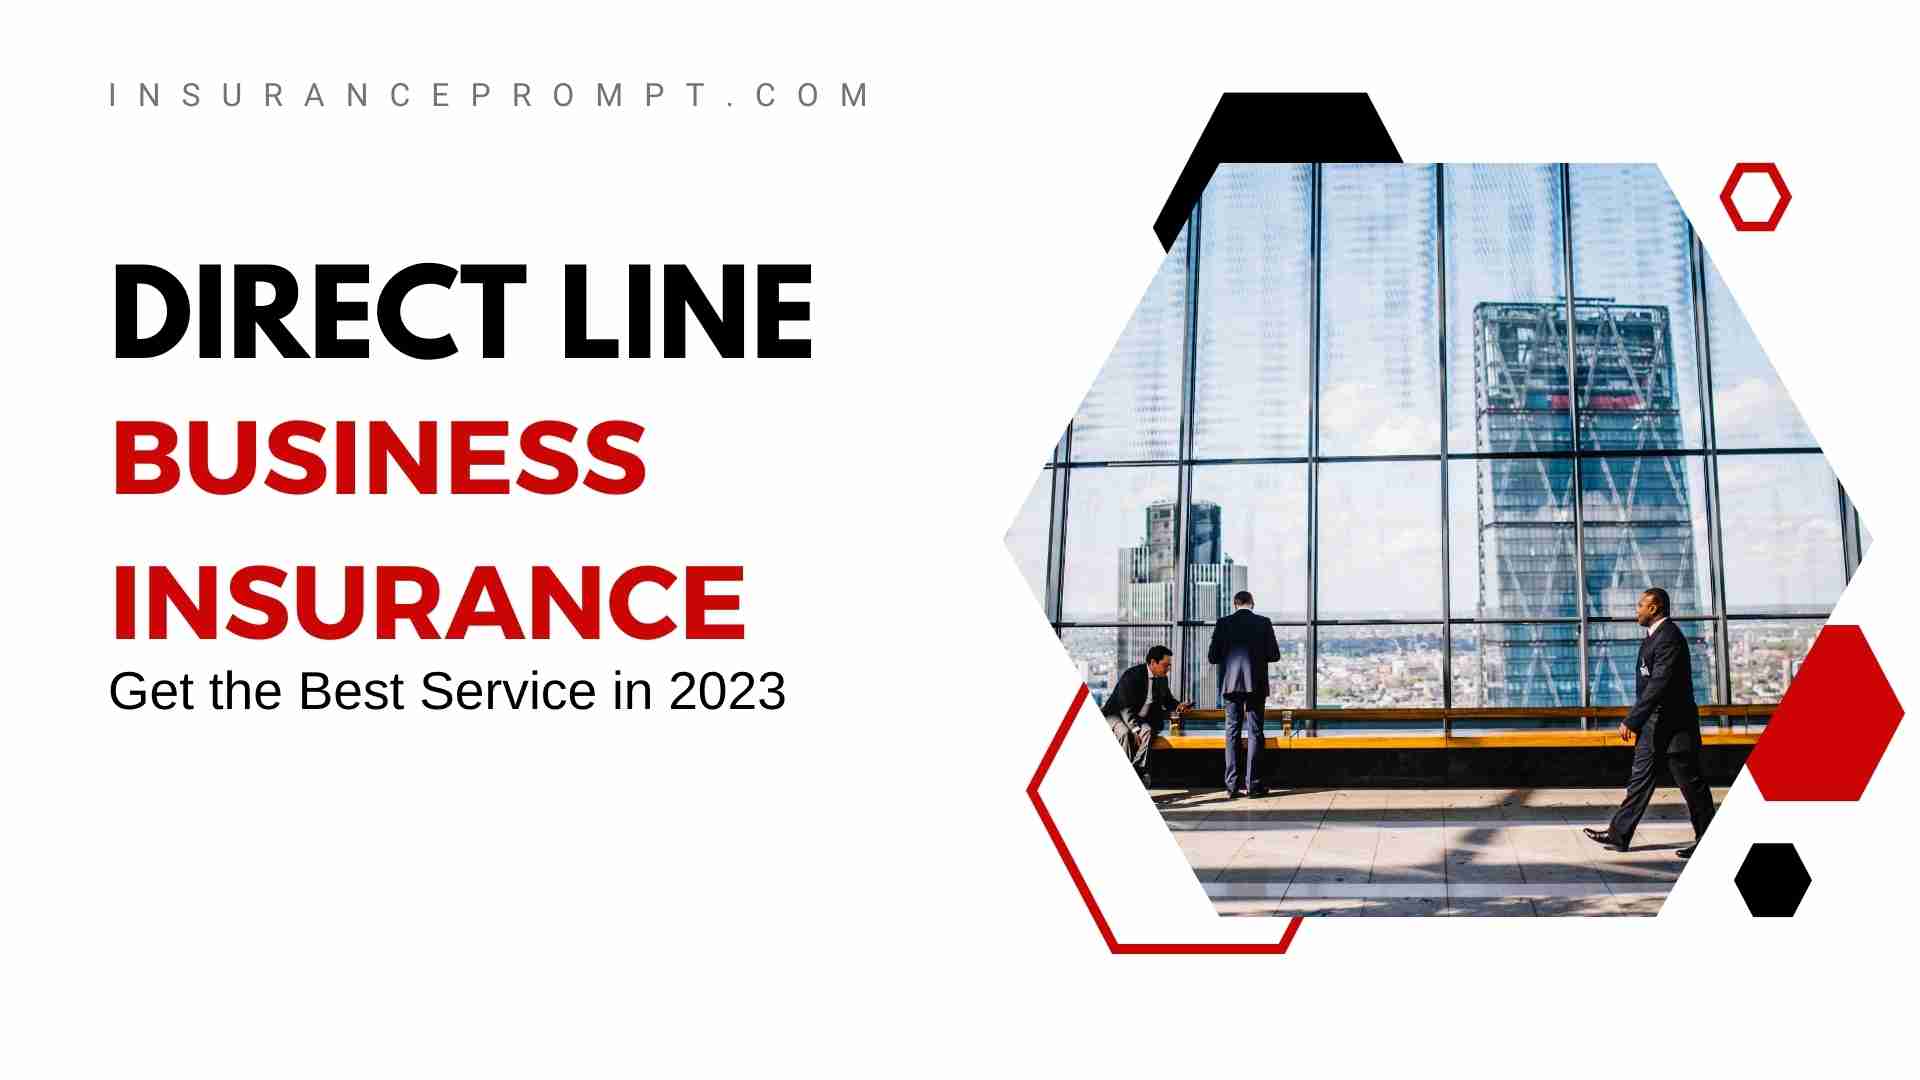 Direct Line Business Insurance 2023: Flexible Policies